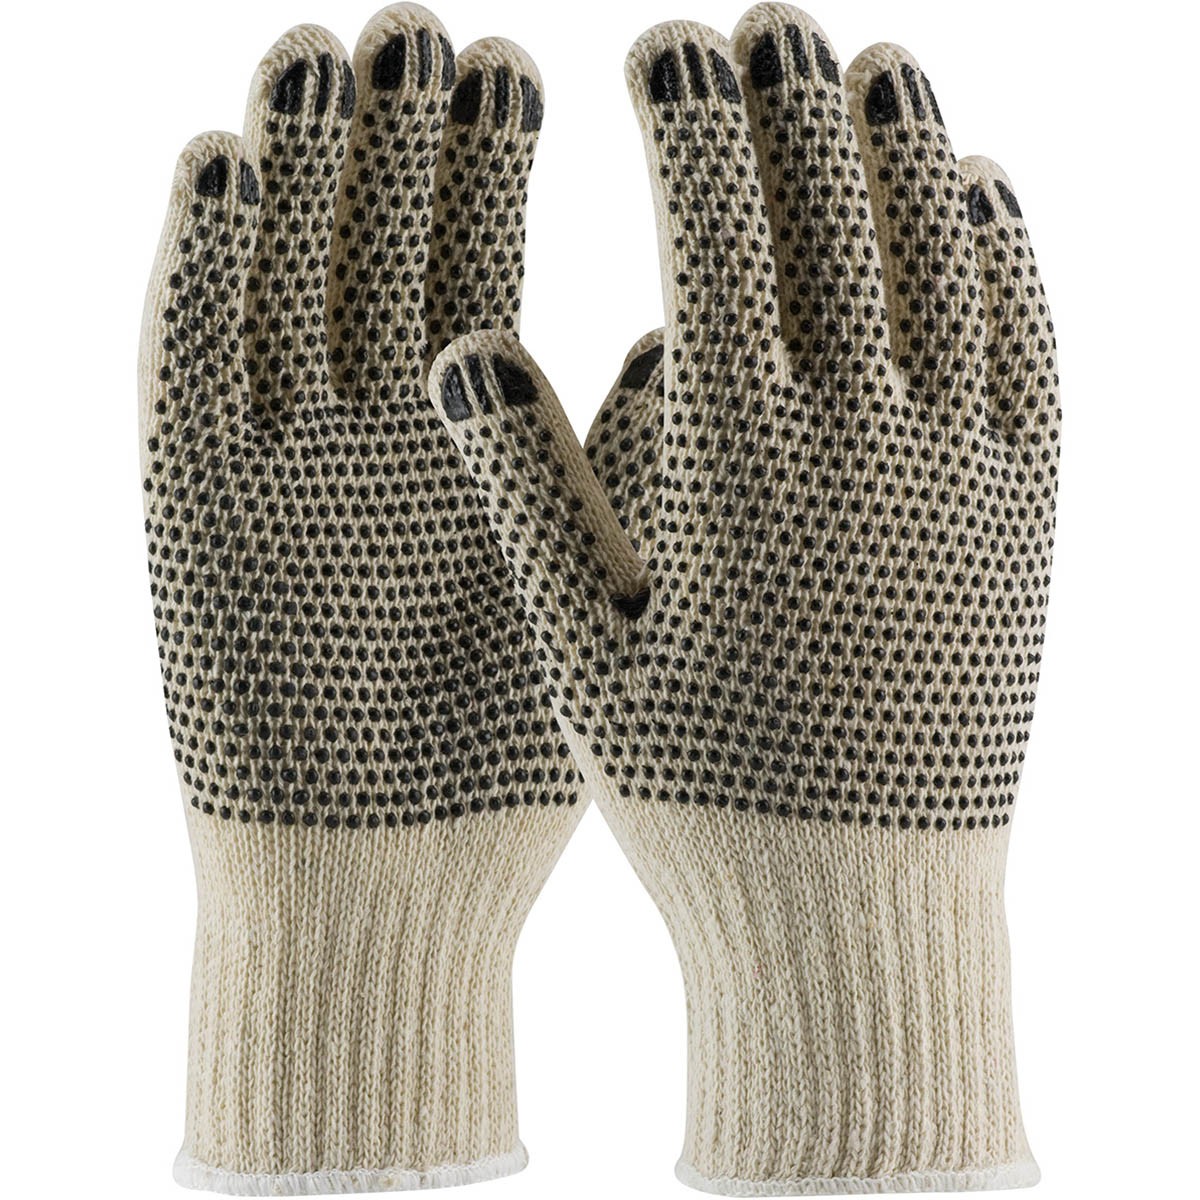 PIP 33-115 Seamless Knit Polyester Glove with Polyurethane Coated Smooth Grip on Palm & Fingers